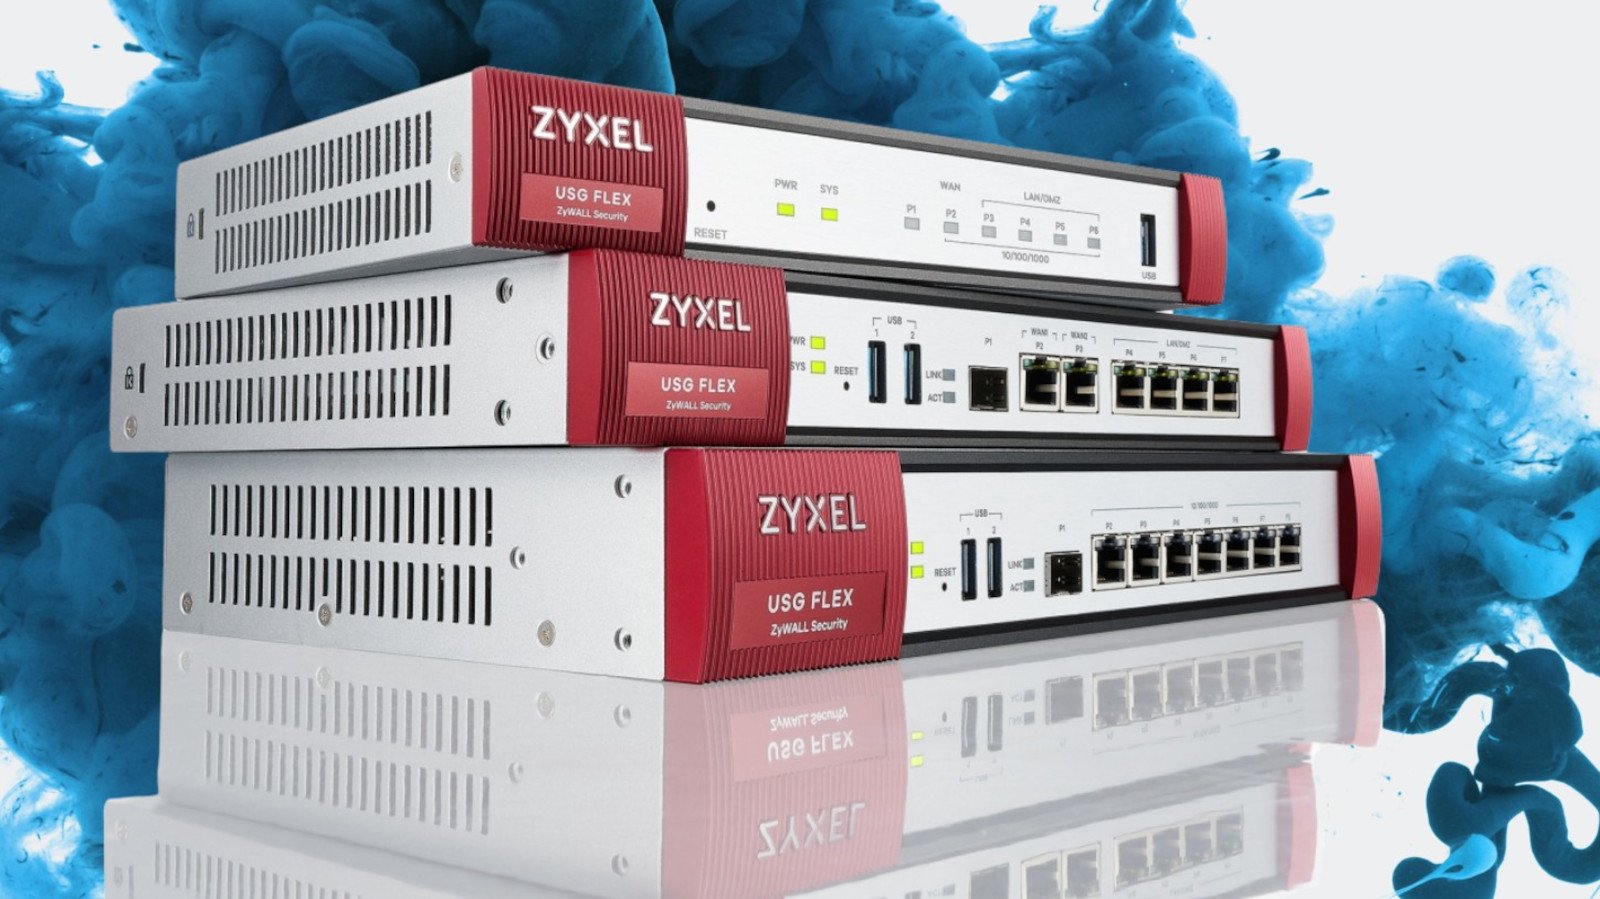 Zyxel warns of critical vulnerabilities in firewall and VPN devices